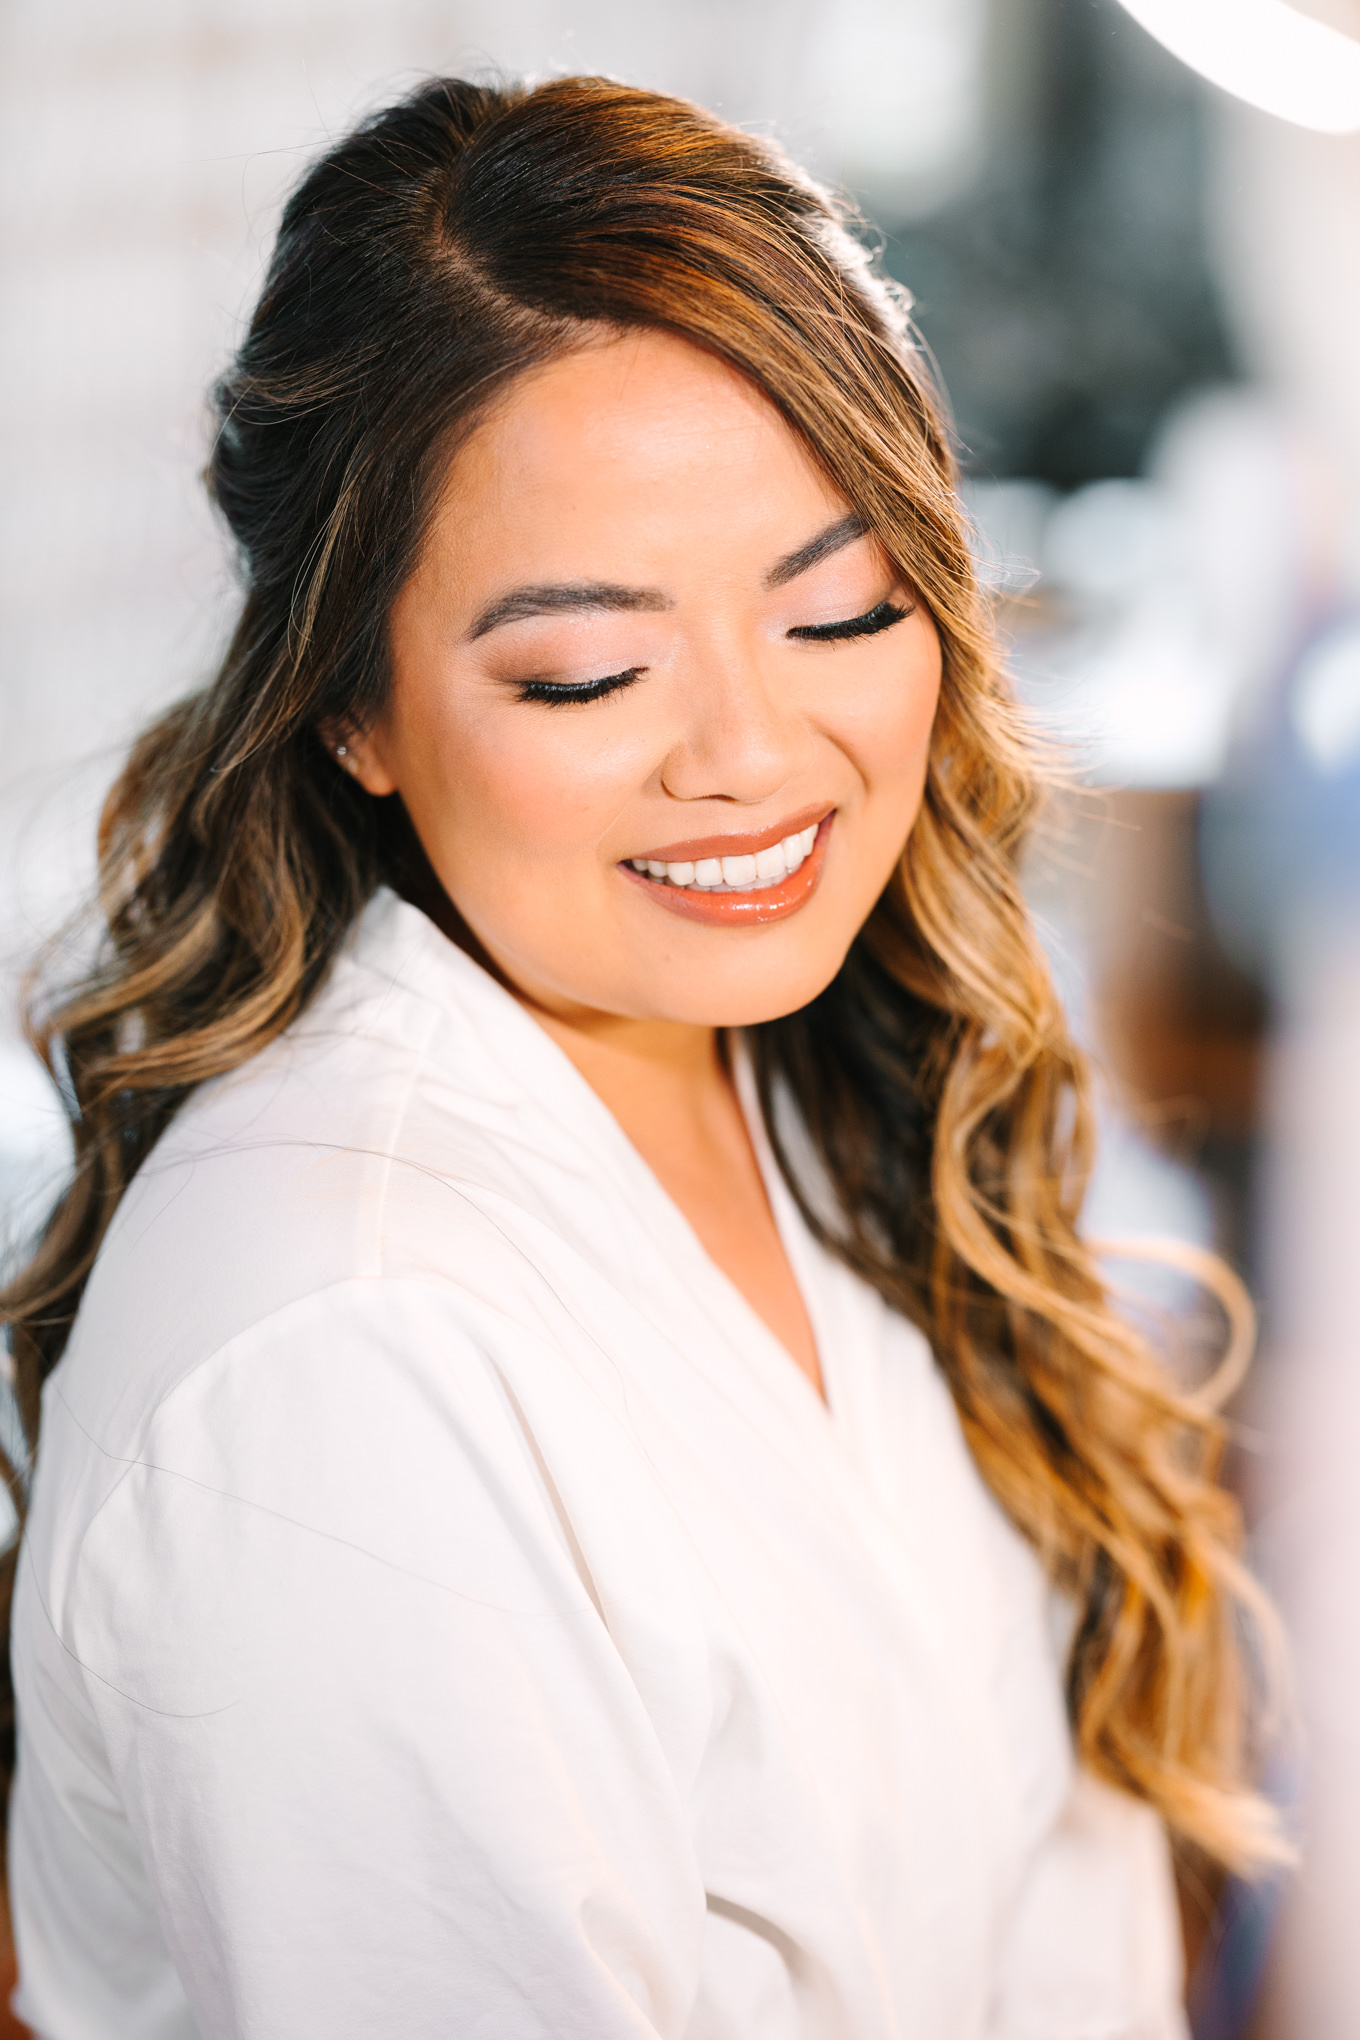 Bride getting makeup done | Pink and orange Lautner Compound wedding | Colorful Palm Springs wedding photography | #palmspringsphotographer #palmspringswedding #lautnercompound #southerncaliforniawedding  Source: Mary Costa Photography | Los Angeles